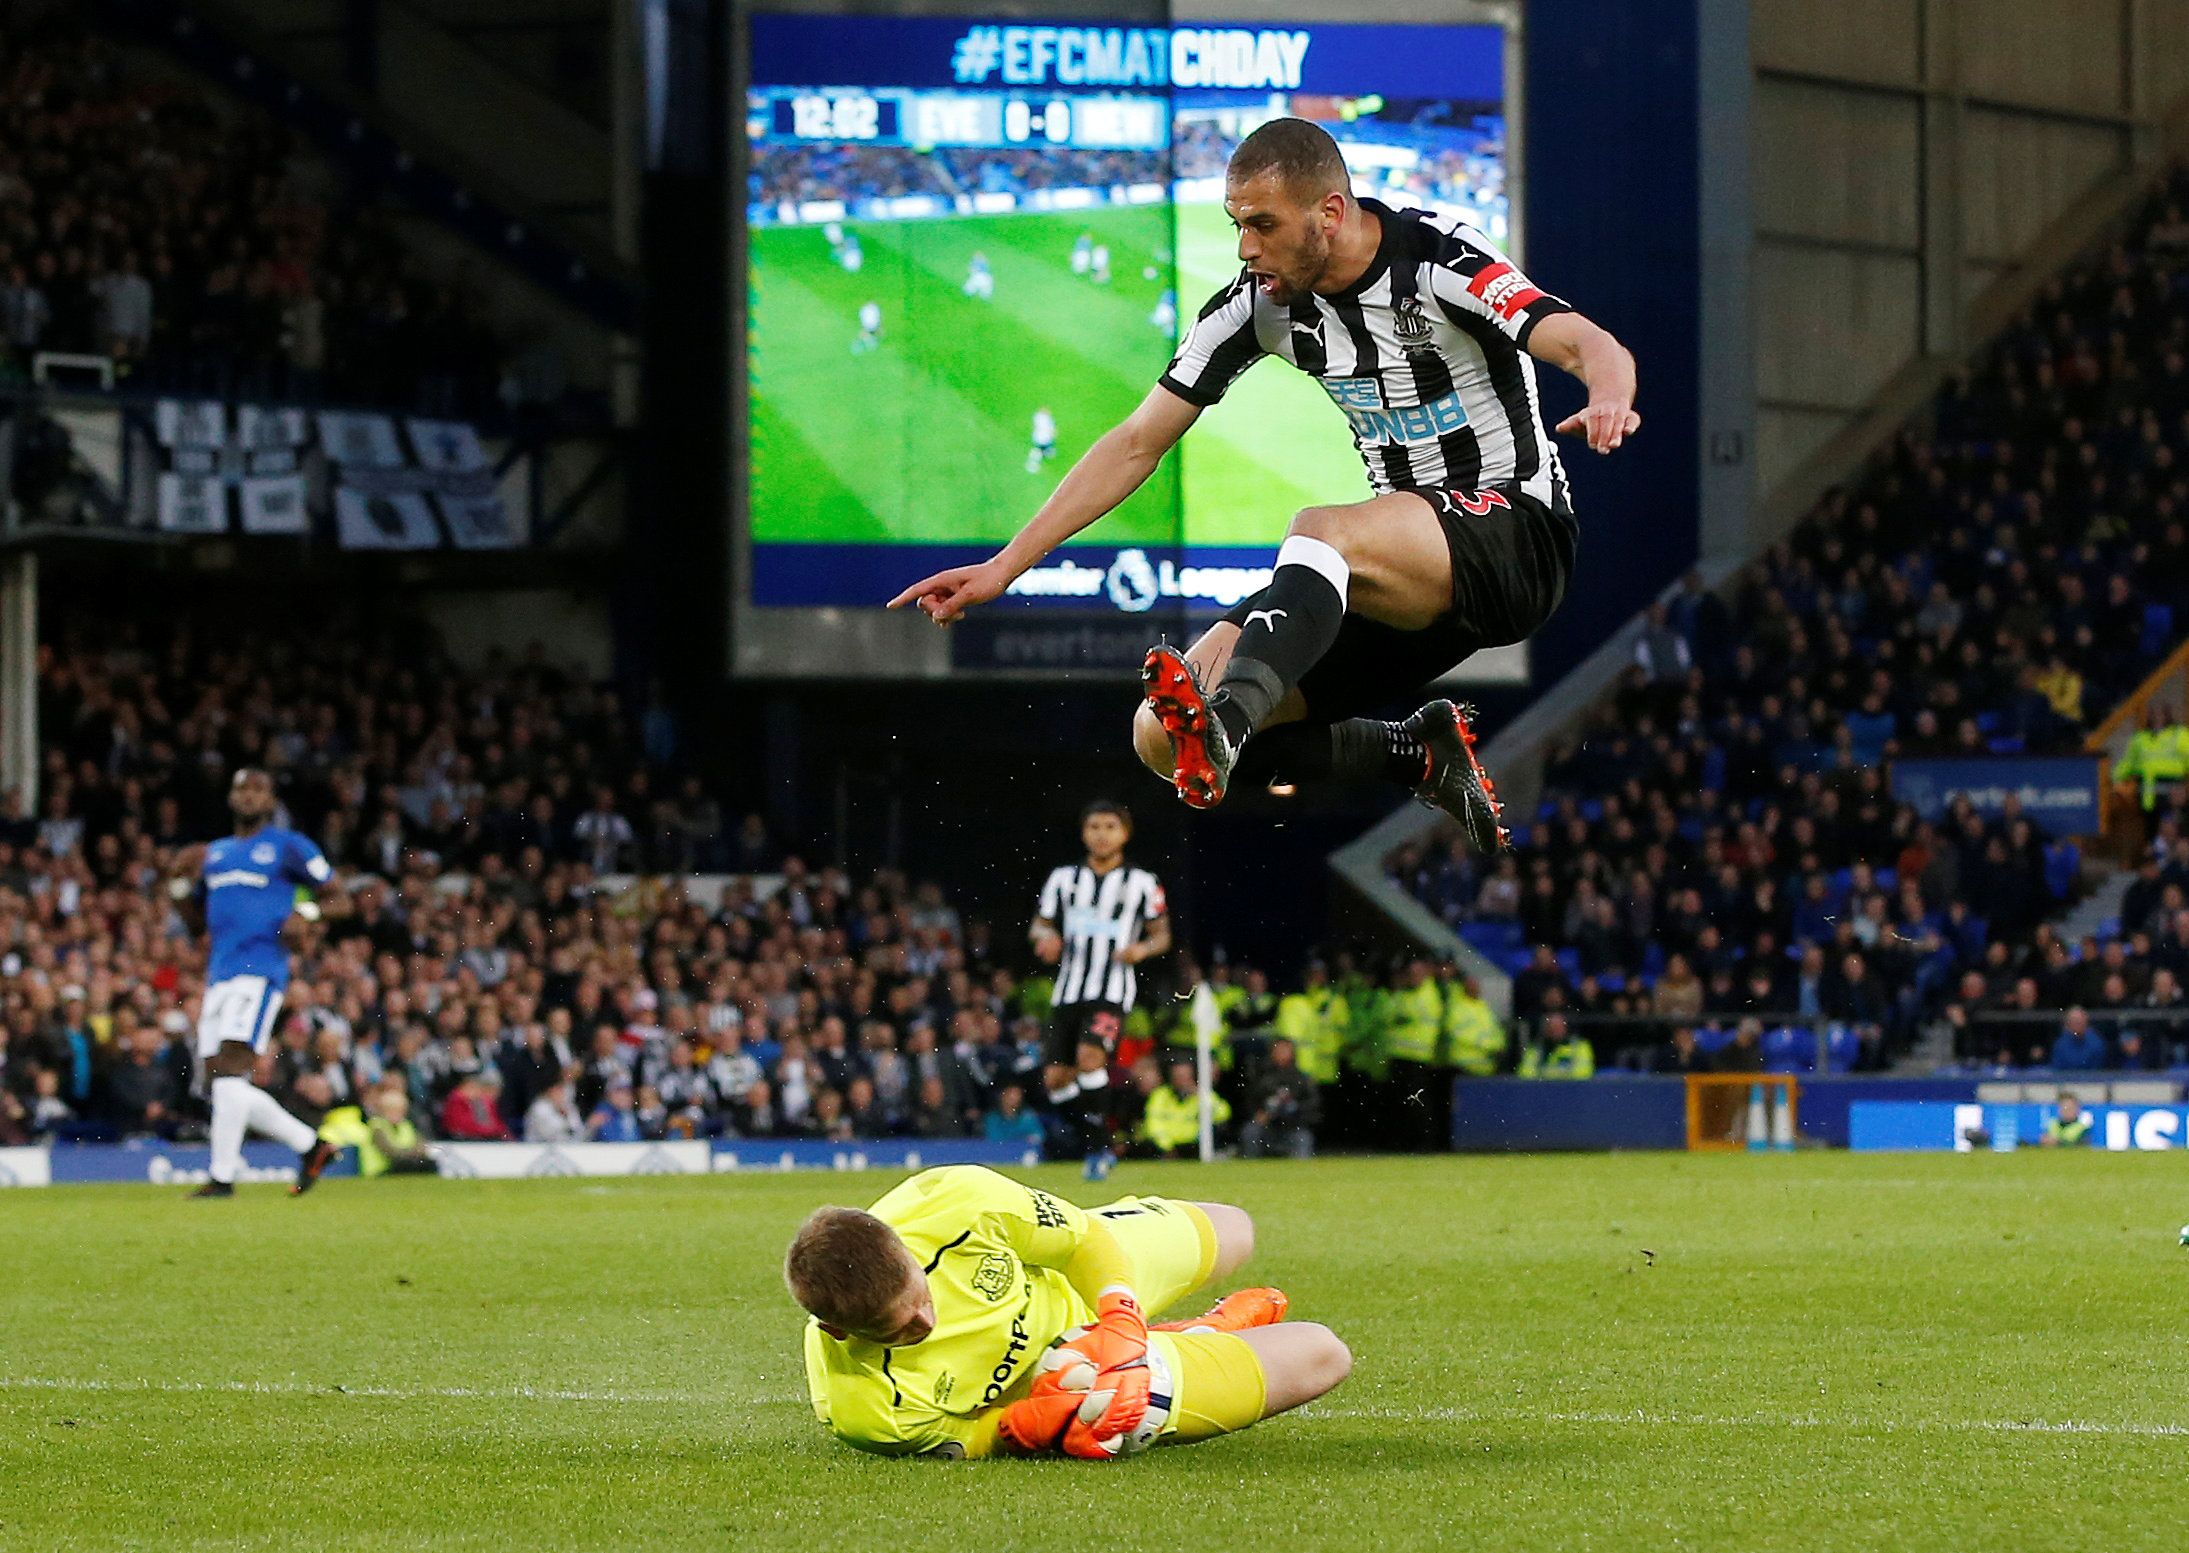 Soccer Football - Premier League - Everton v Newcastle United - Goodison Park, Liverpool, Britain - April 23, 2018   Everton's Jordan Pickford in action with Newcastle United's Islam Slimani         REUTERS/Andrew Yates    EDITORIAL USE ONLY. No use with unauthorized audio, video, data, fixture lists, club/league logos or 